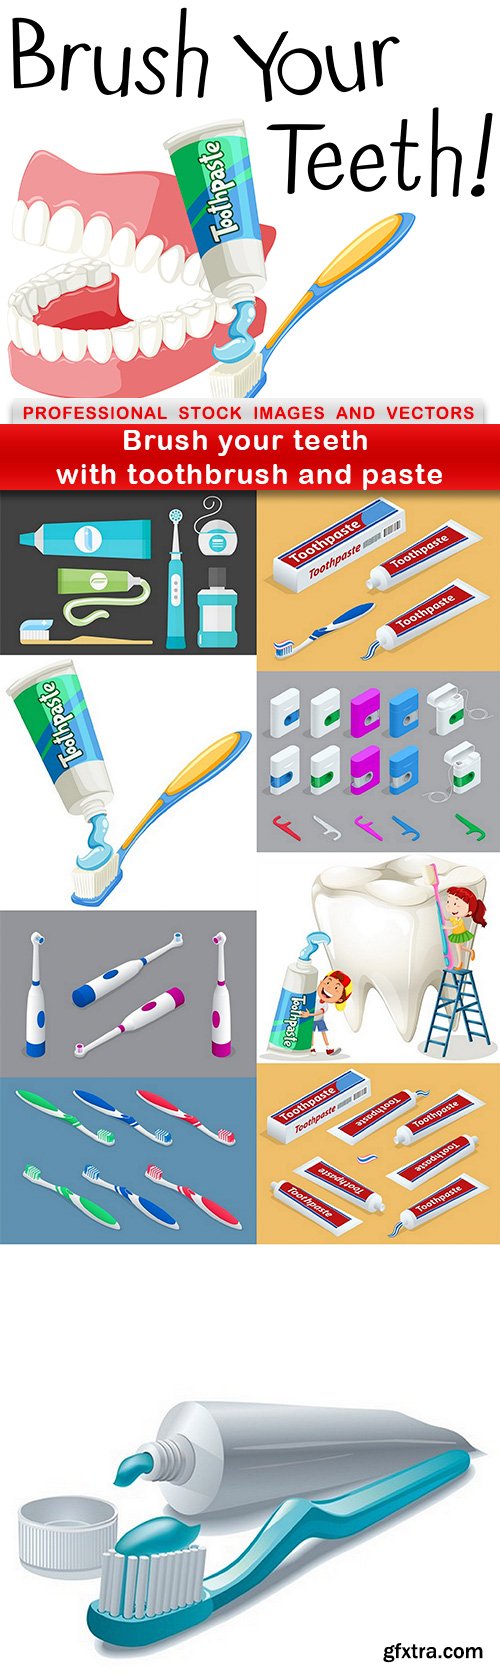 Brush your teeth with toothbrush and paste - 10 EPS